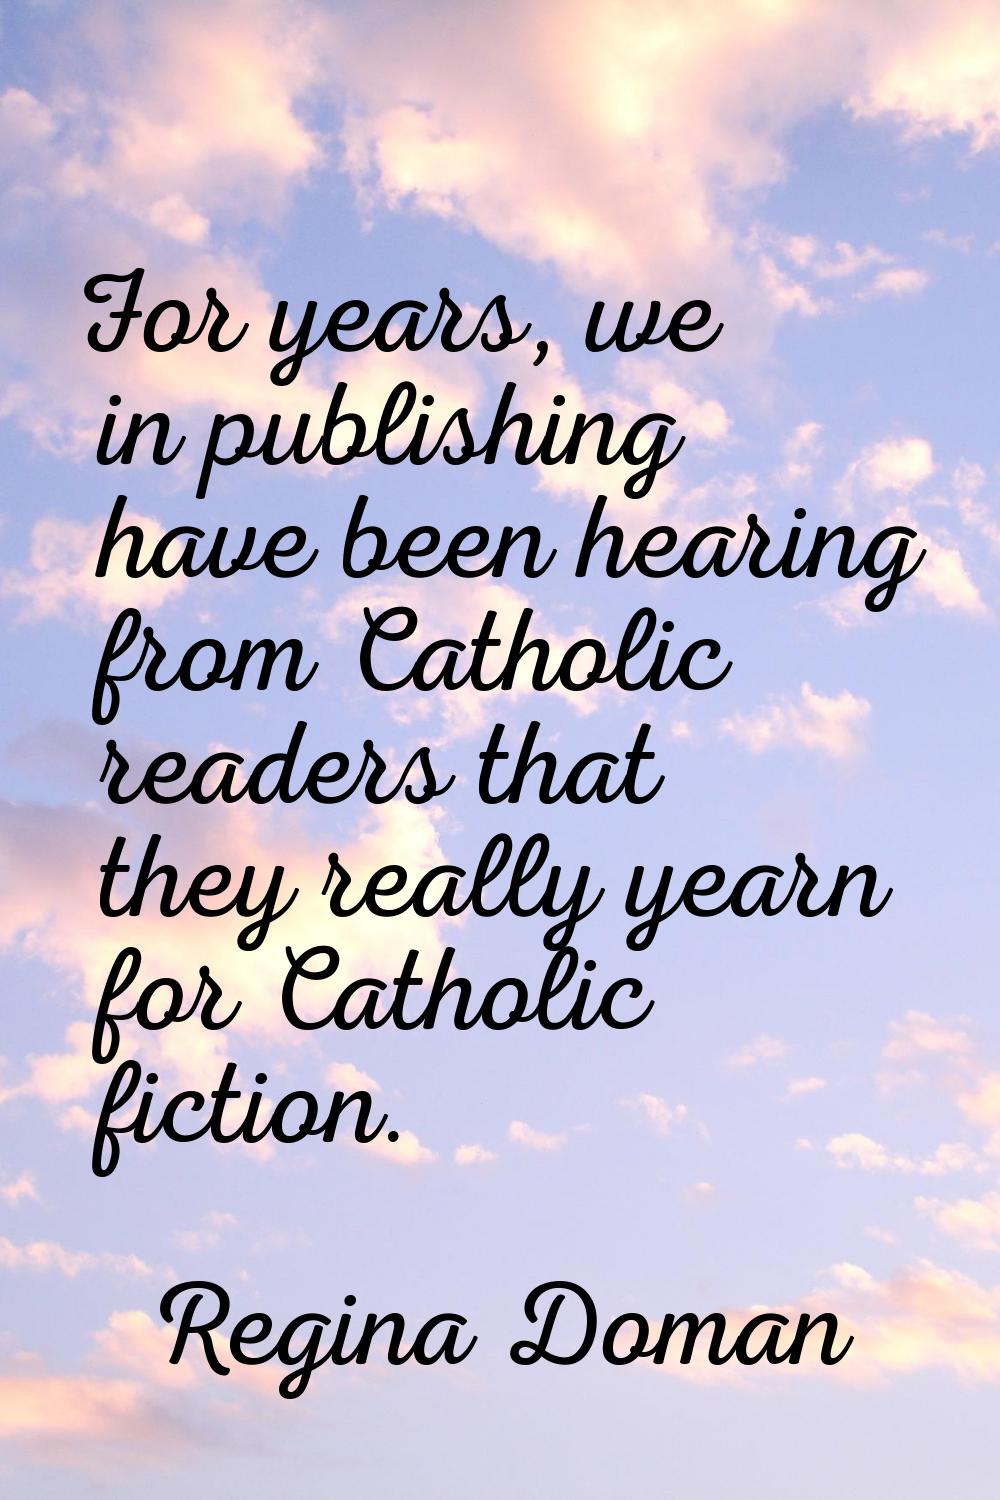 For years, we in publishing have been hearing from Catholic readers that they really yearn for Cath